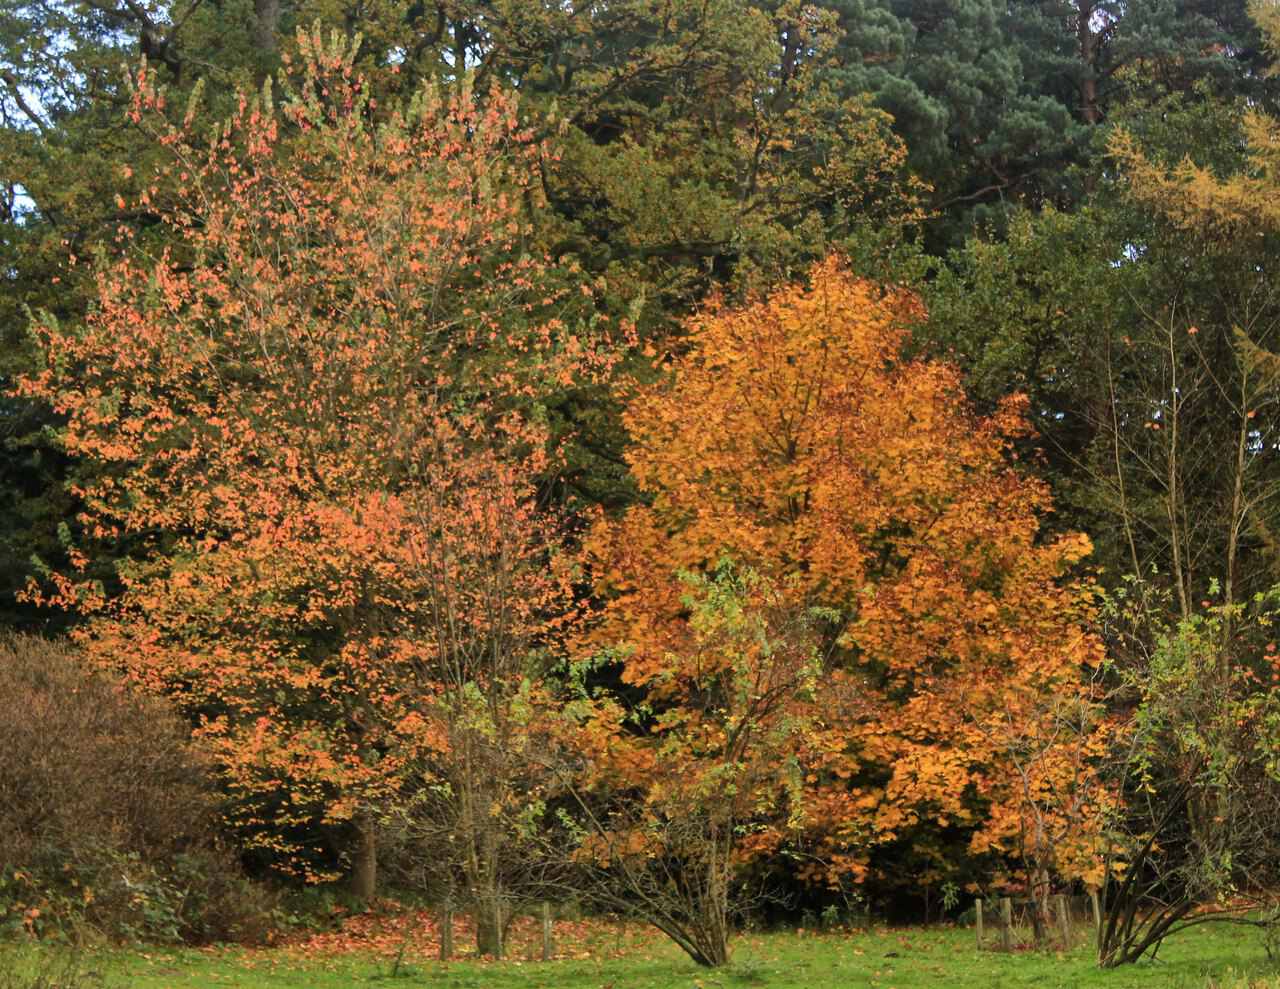 Bedgebury National Pinetum and Forest